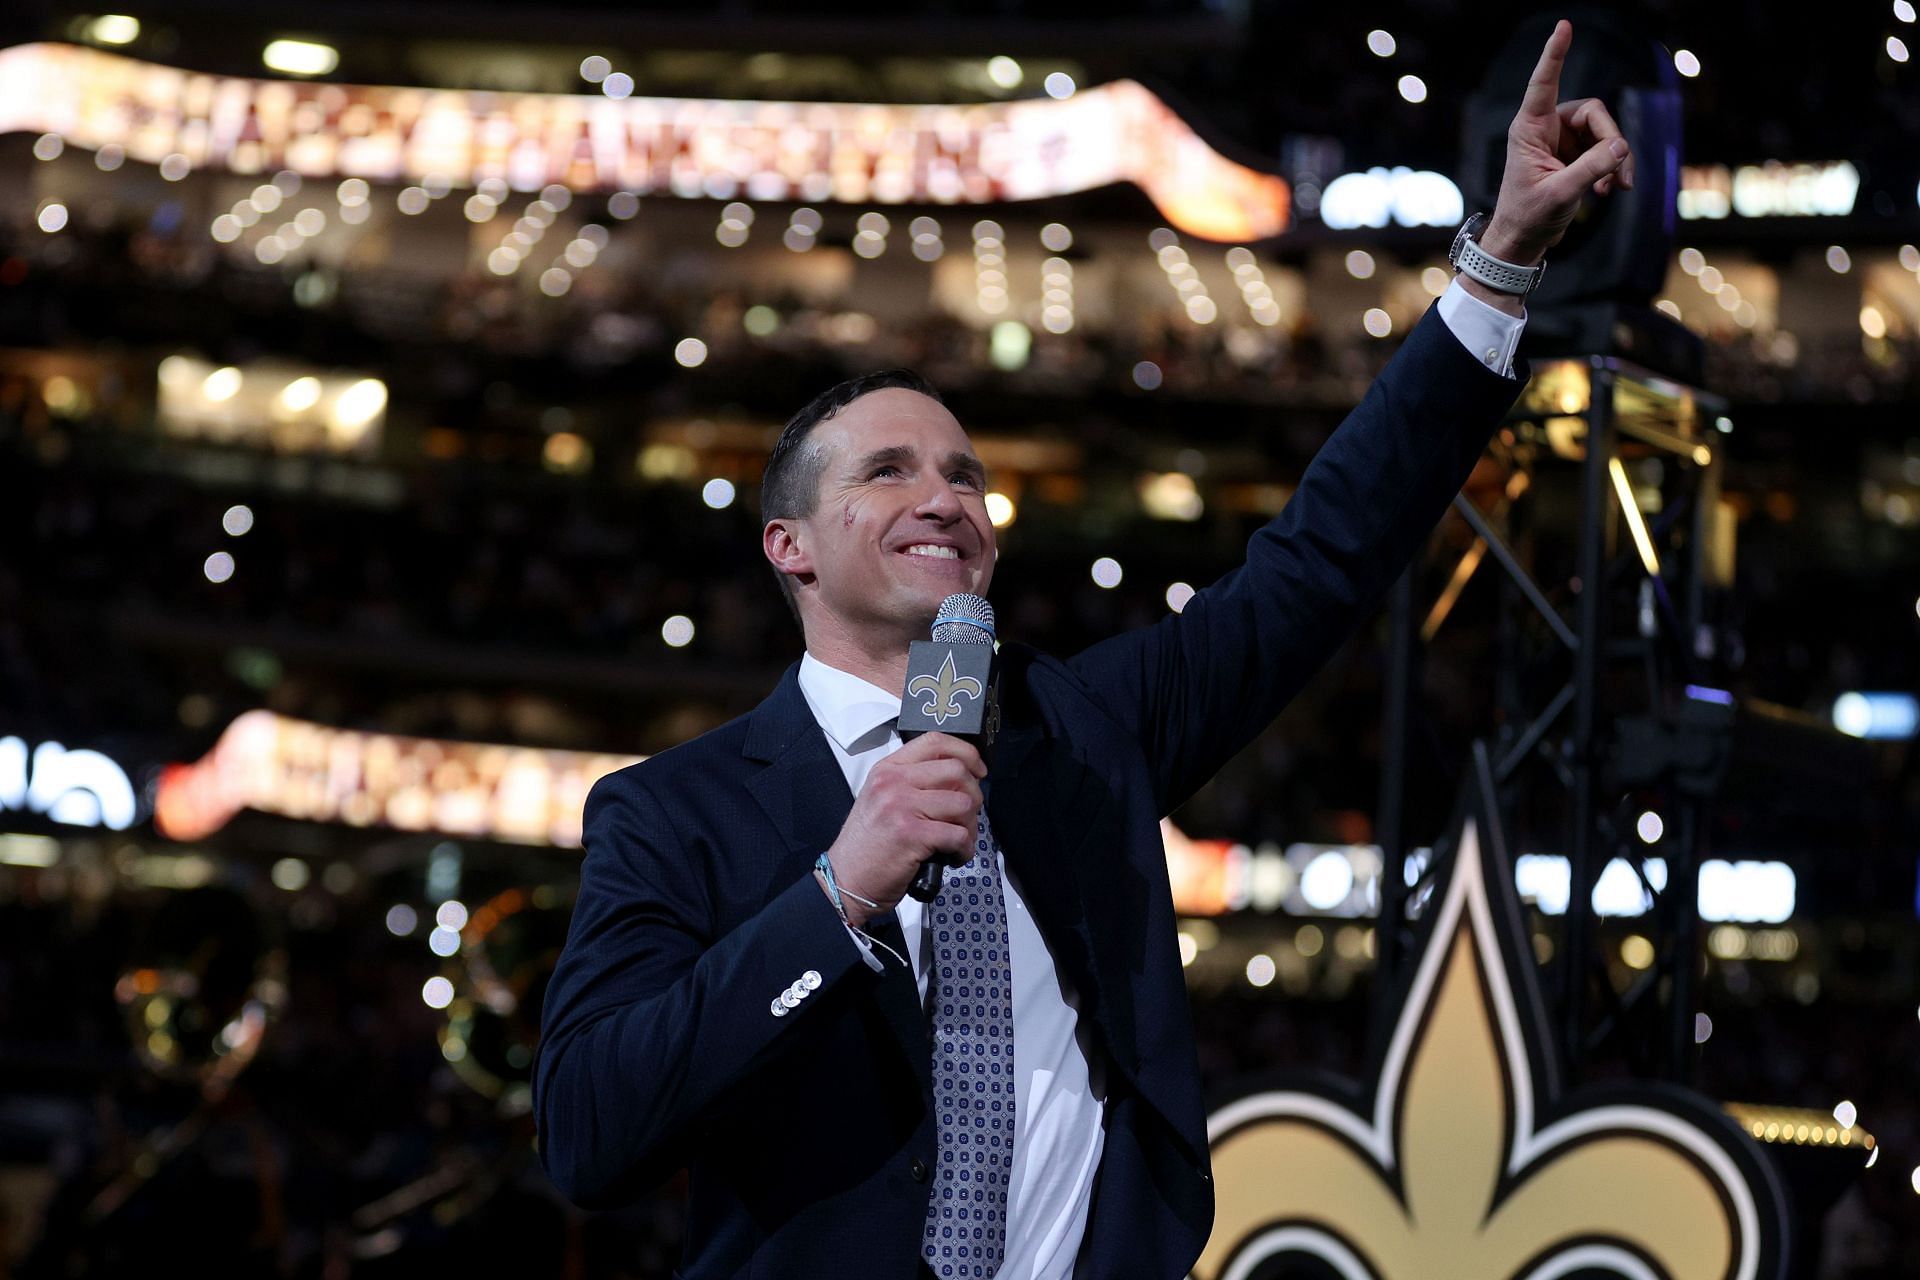 Drew Brees formally of the New Orleans Saints